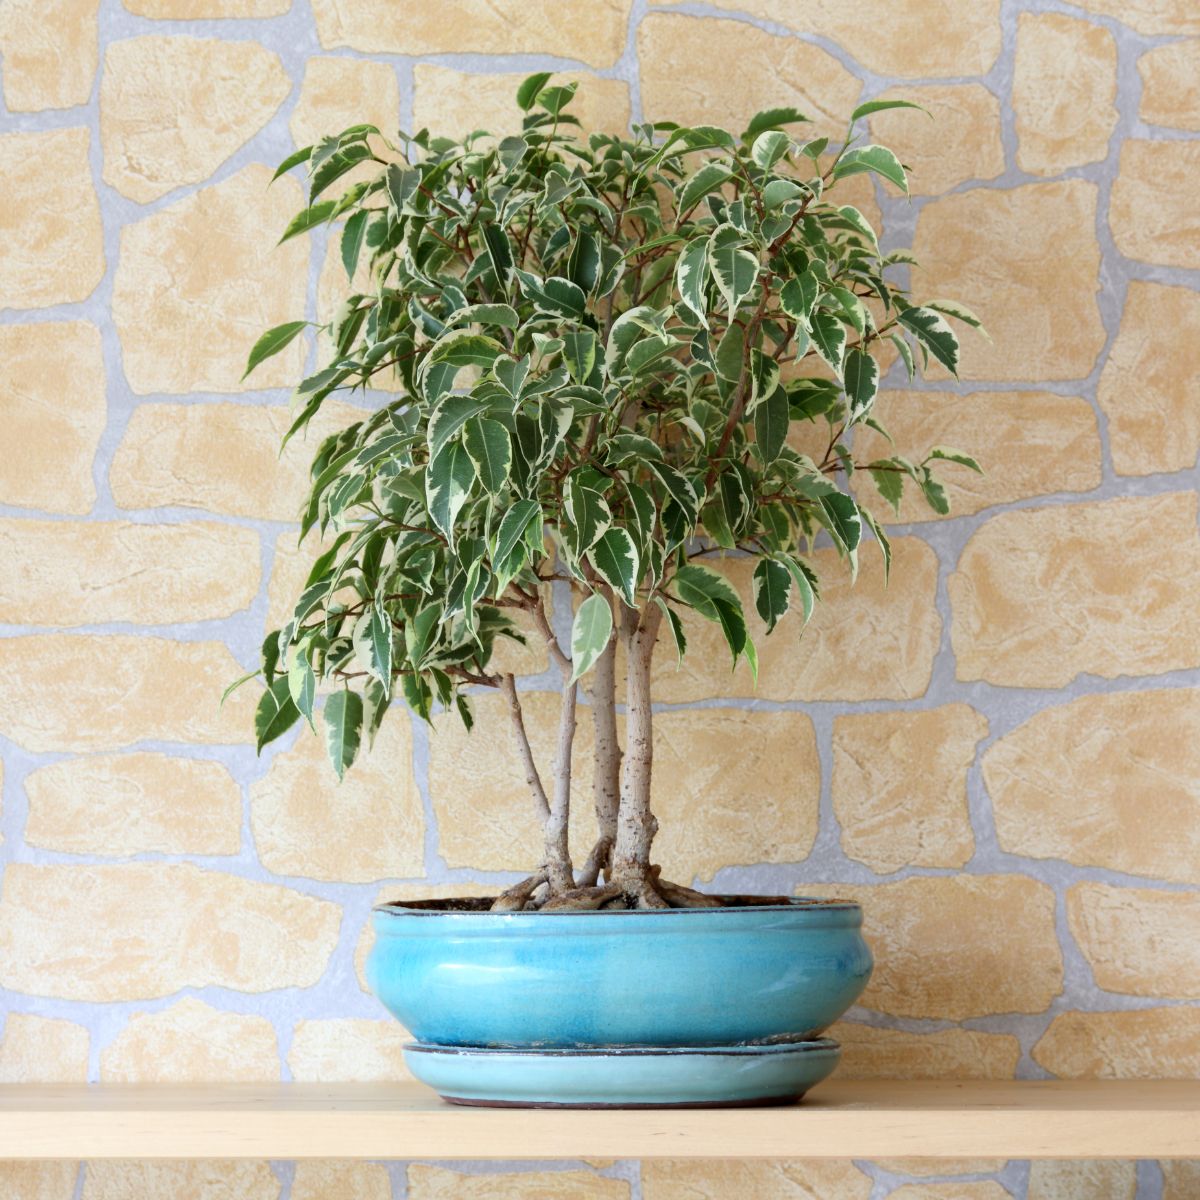 Tall Weeping Fig growing in a blue pot on a wooden shelf.